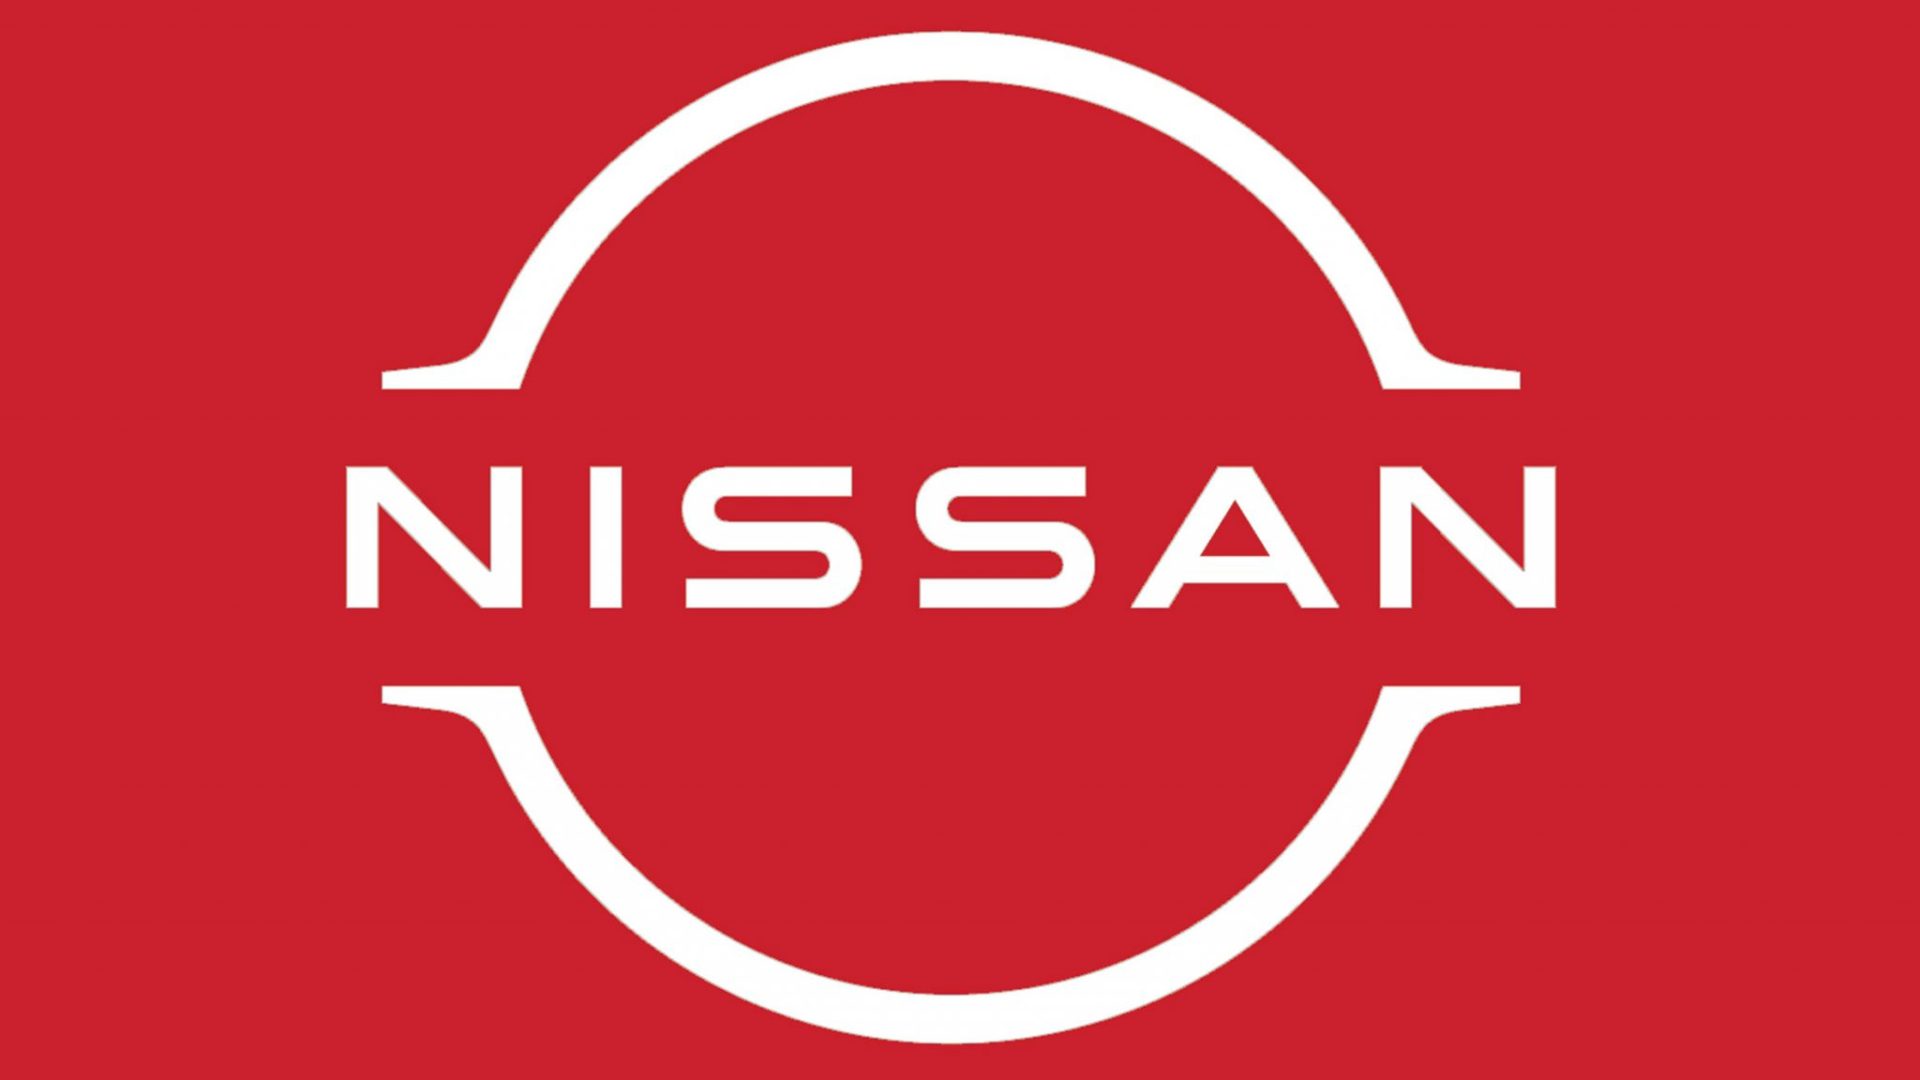 Nissan latest car brand to roll out flat logo